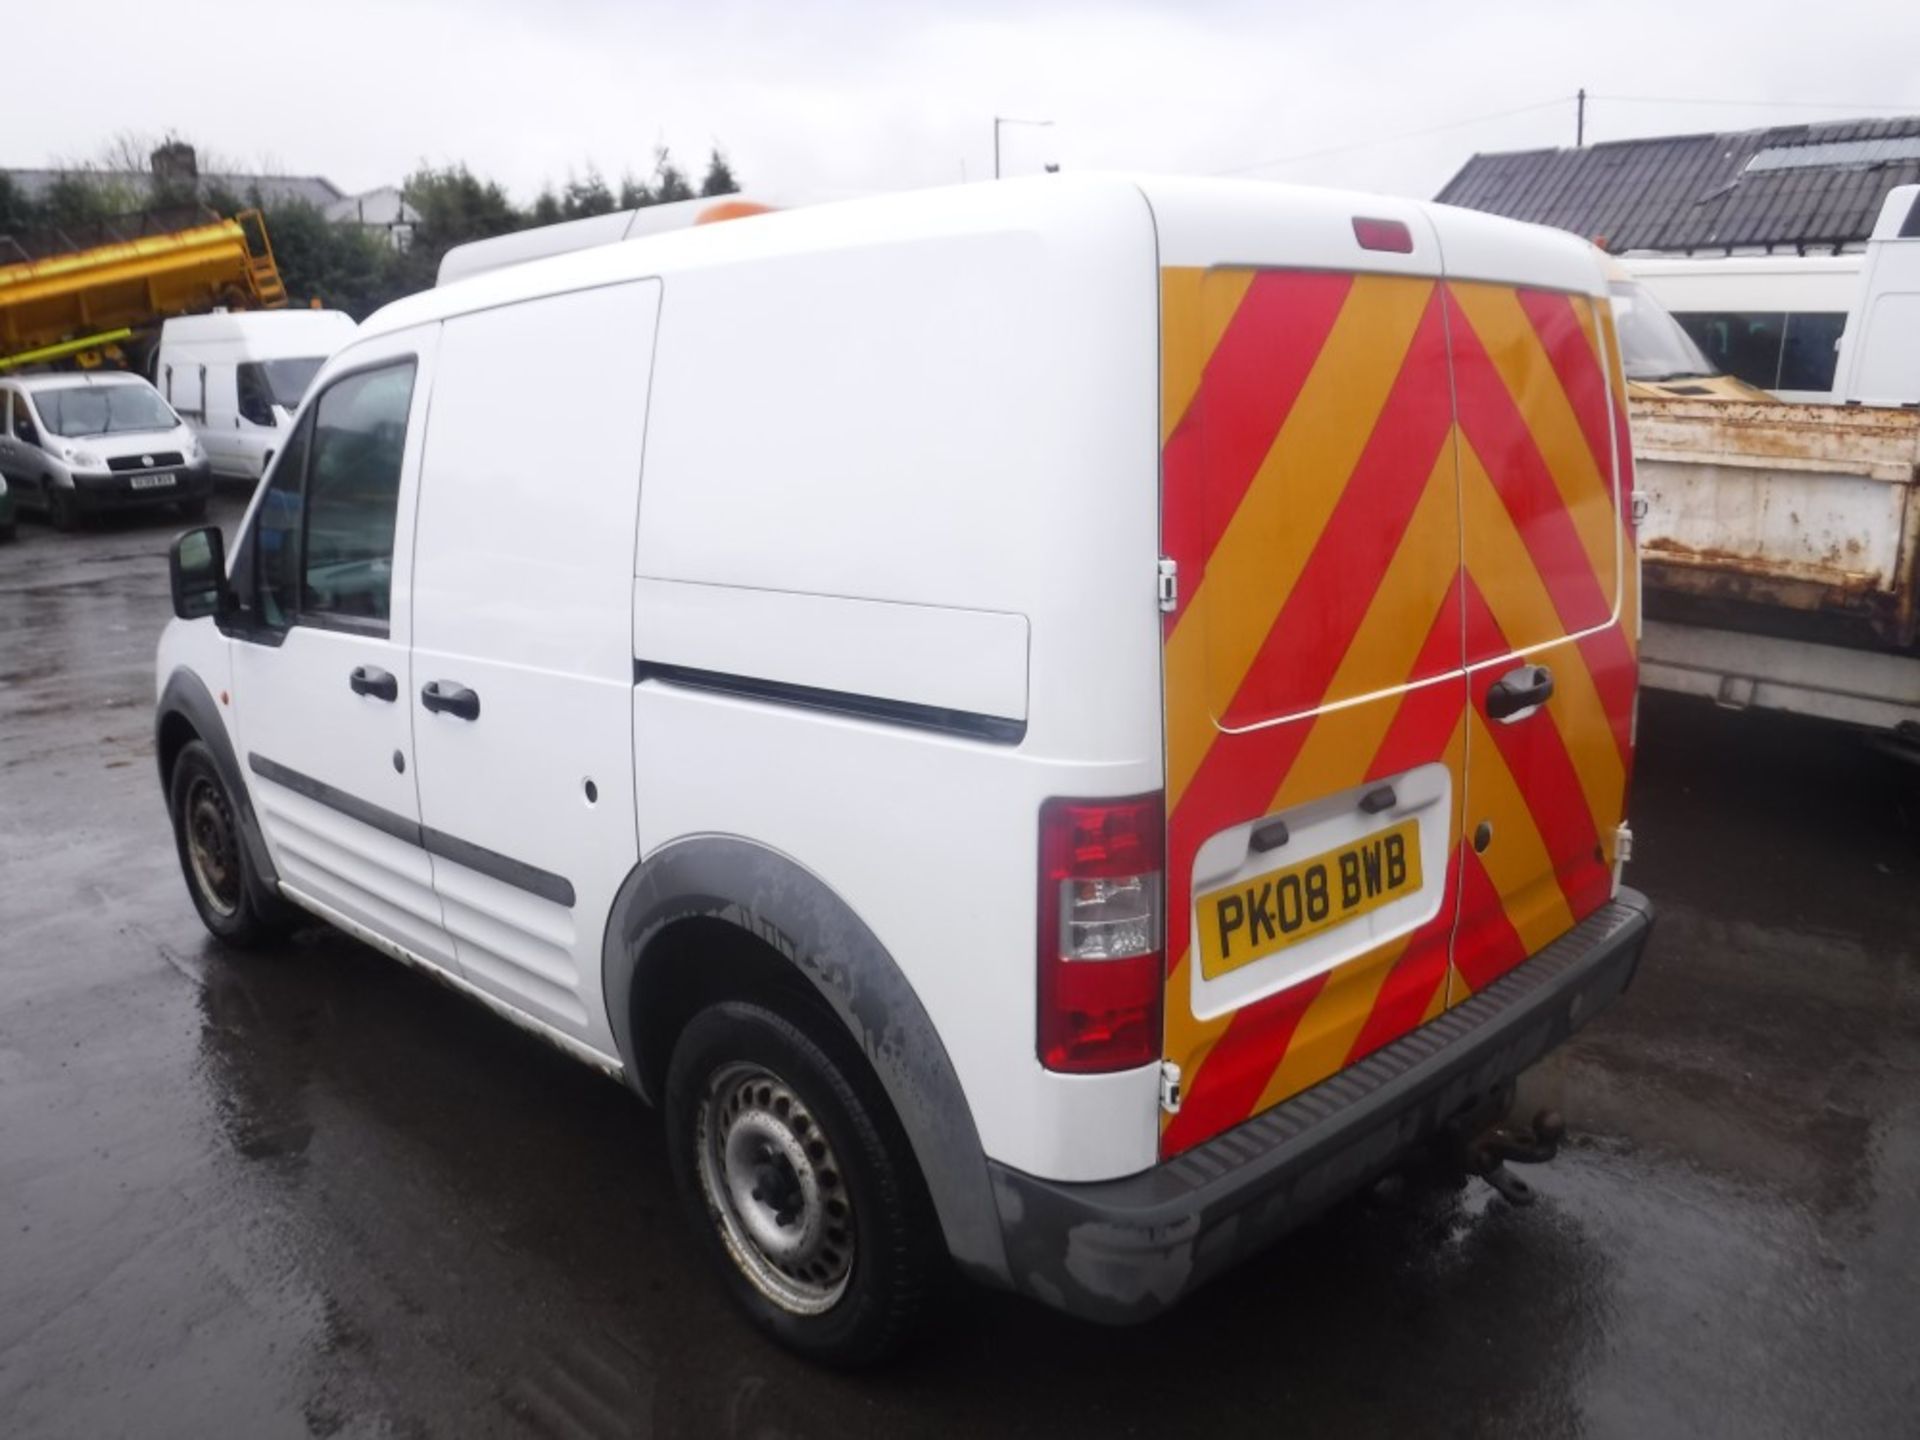 08 reg FORD TRANSIT CONNECT T200 L75 (DIRECT COUNCIL) 1ST REG 03/08, 115531M, V5 HERE, 1 OWNER - Image 3 of 5